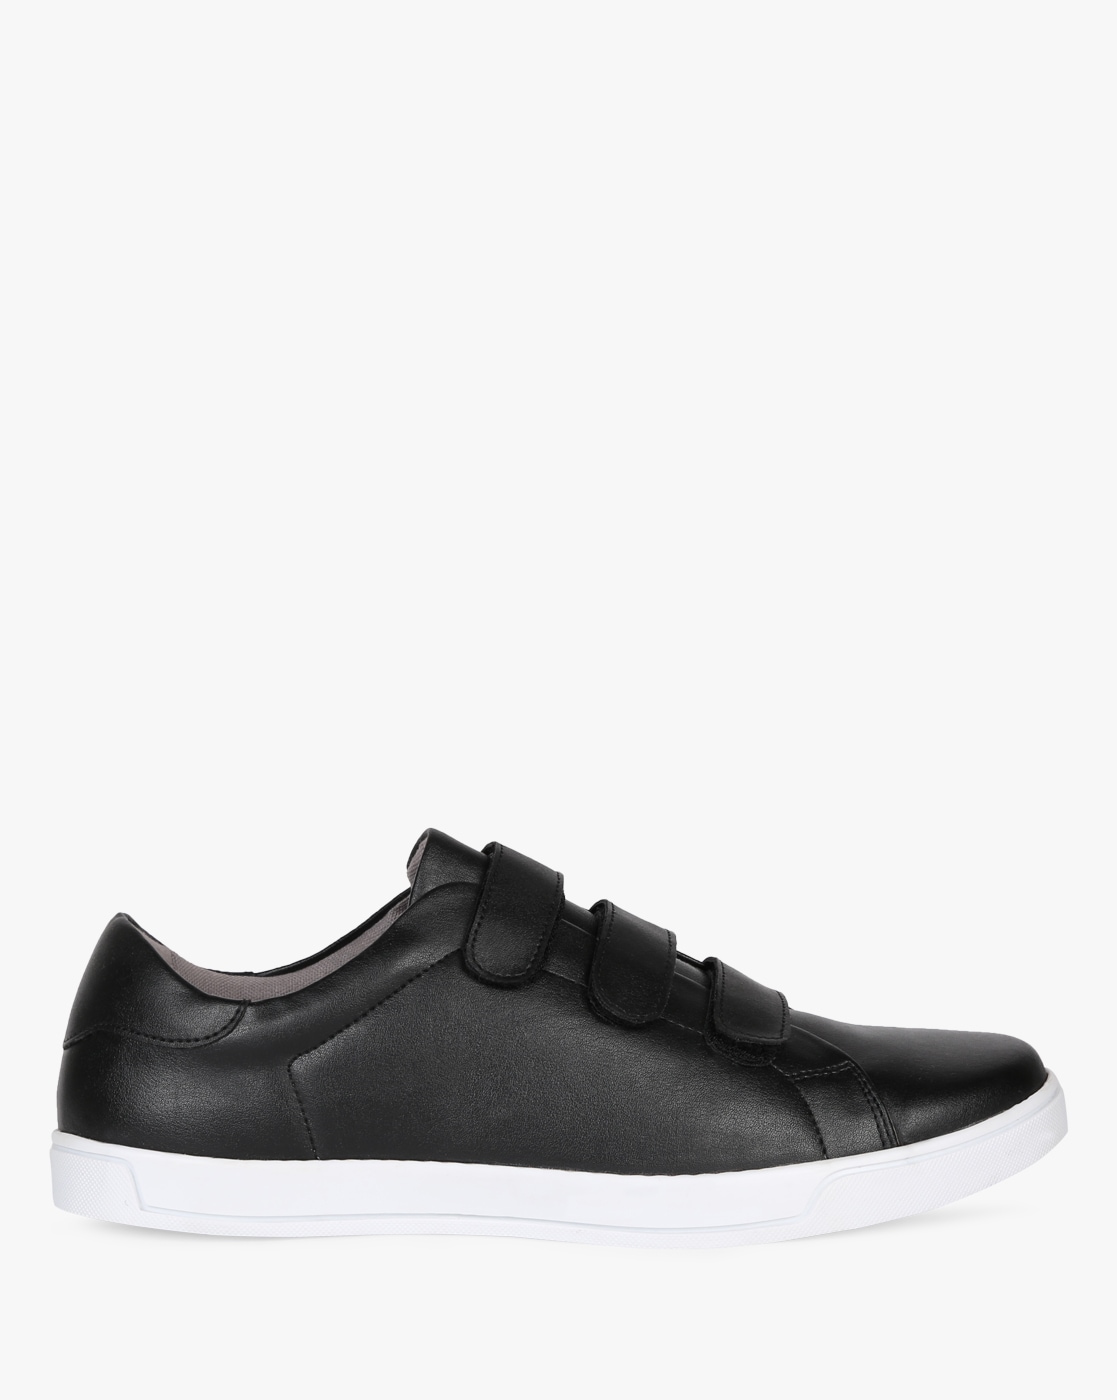 For 600/-(70% Off) Panelled Multi-Strap Slip-On Sneakers at Ajio